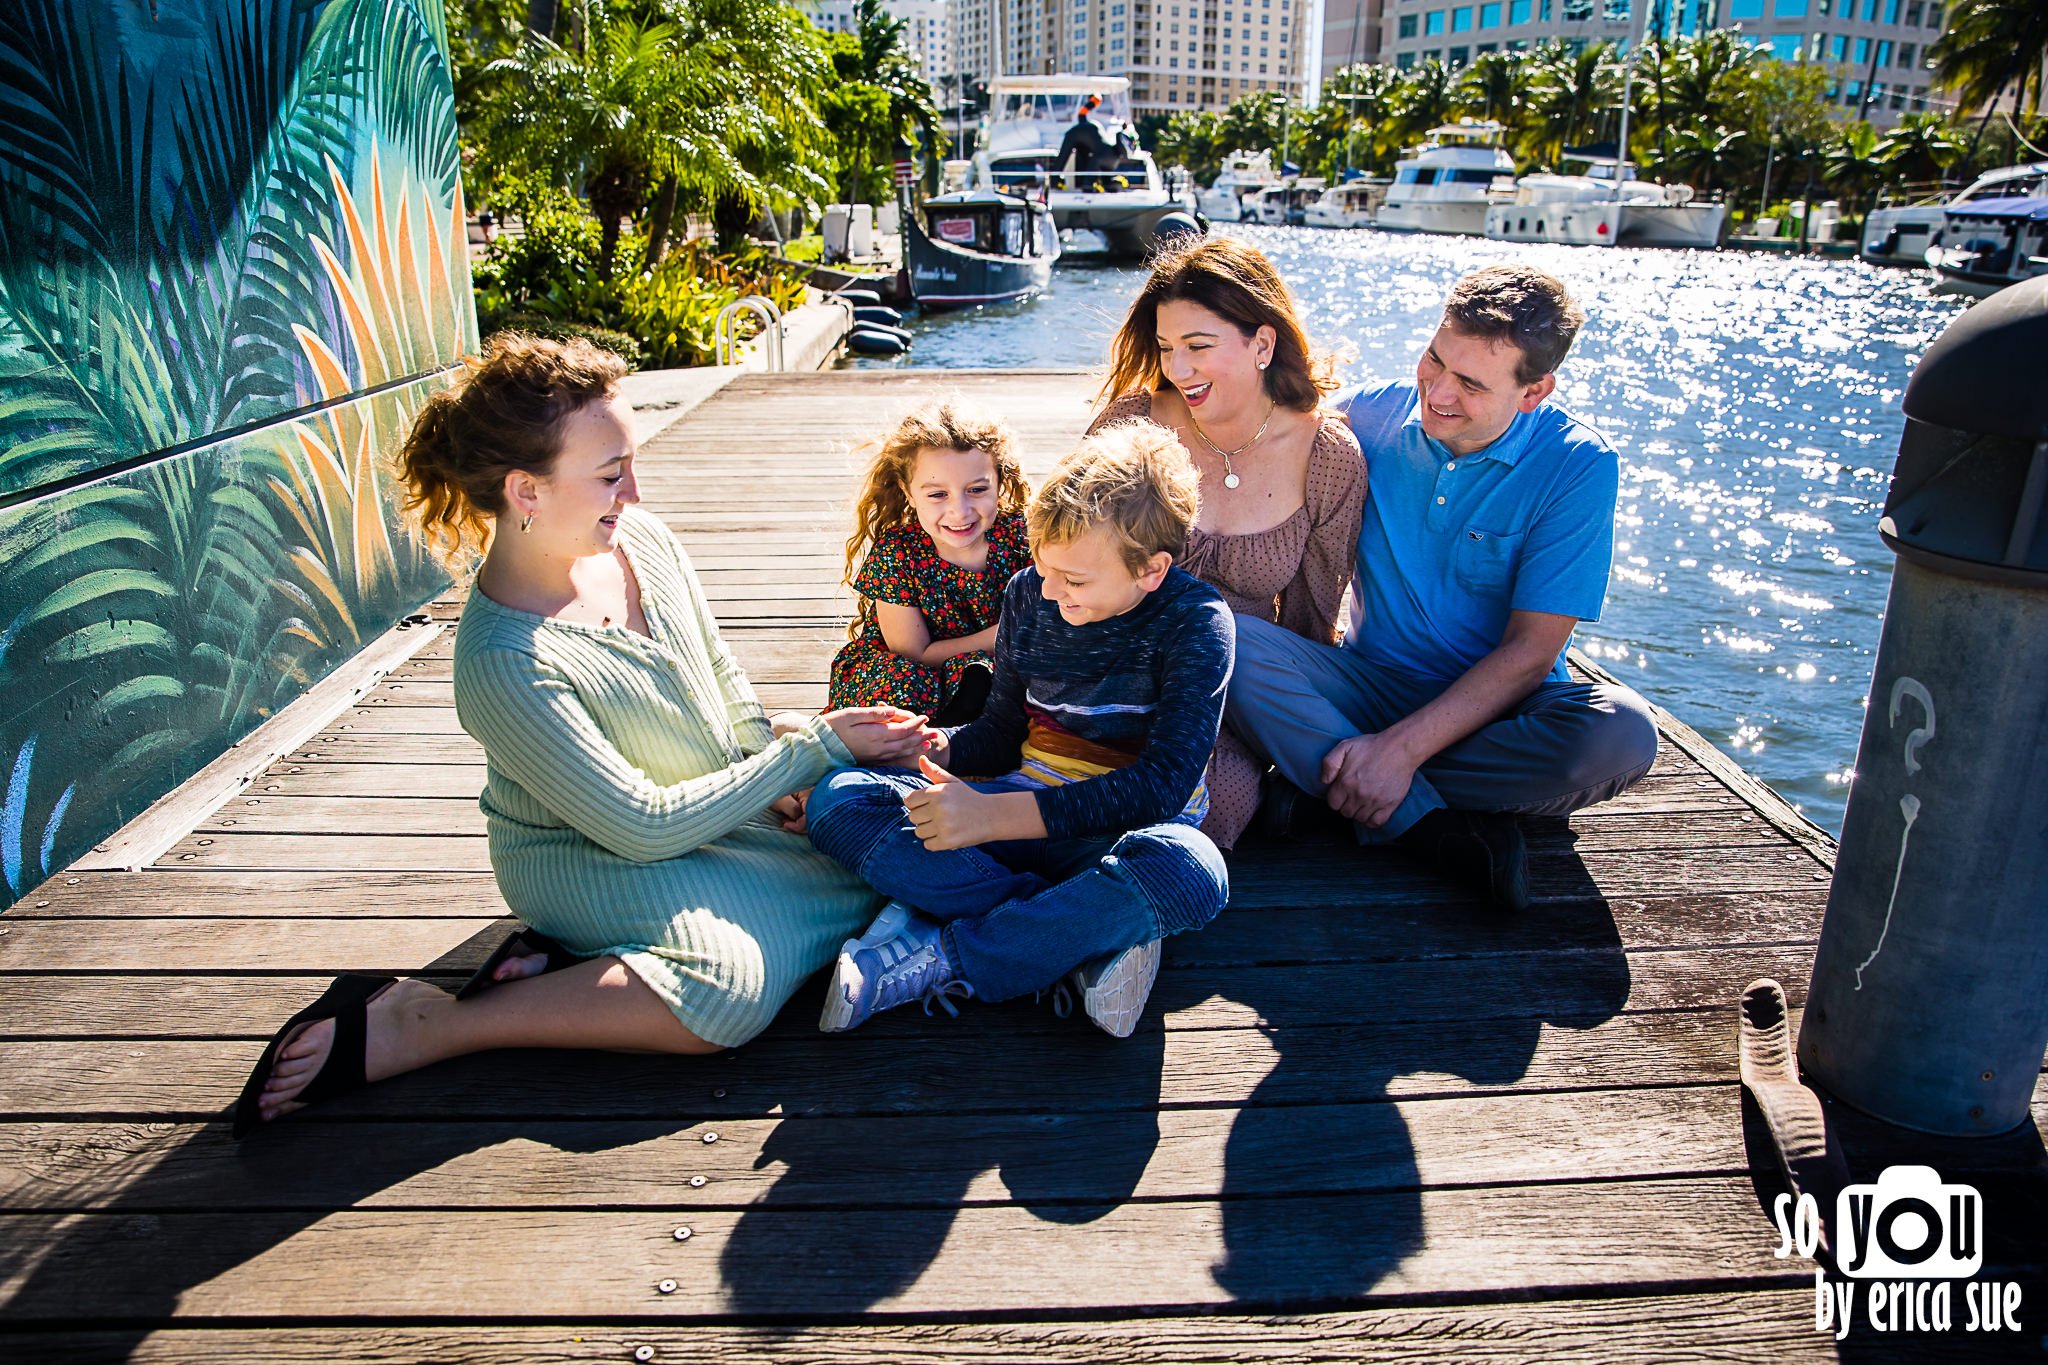 16-walters-lifestyle-family-photography-riverwalk-ft-lauderdale-so-you-by-erica-sue-CD8A5344.jpg